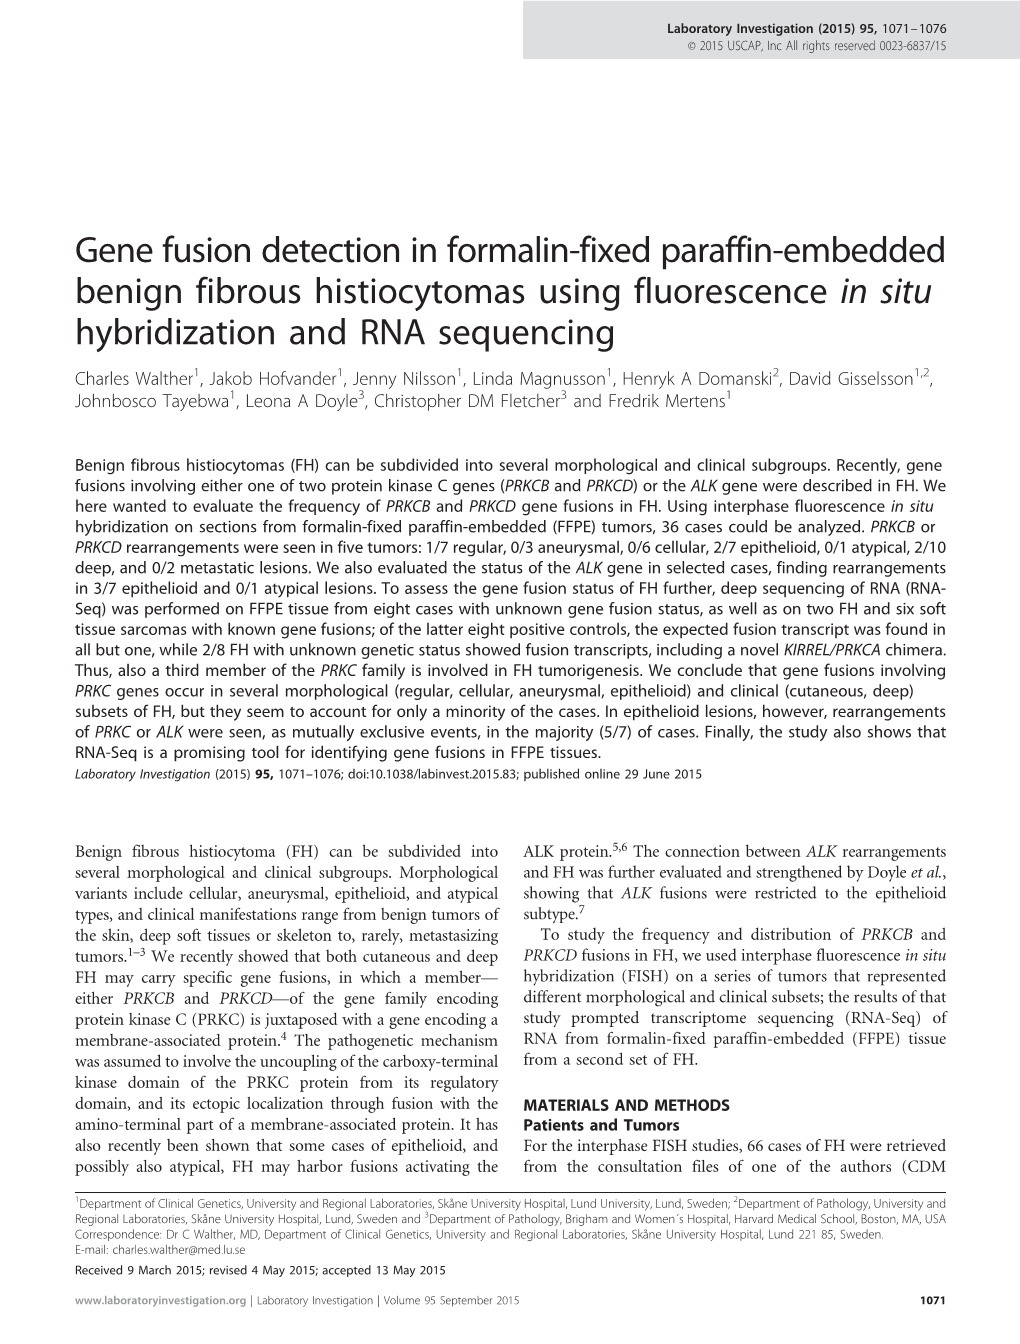 Gene Fusion Detection in Formalin-Fixed Paraffin-Embedded